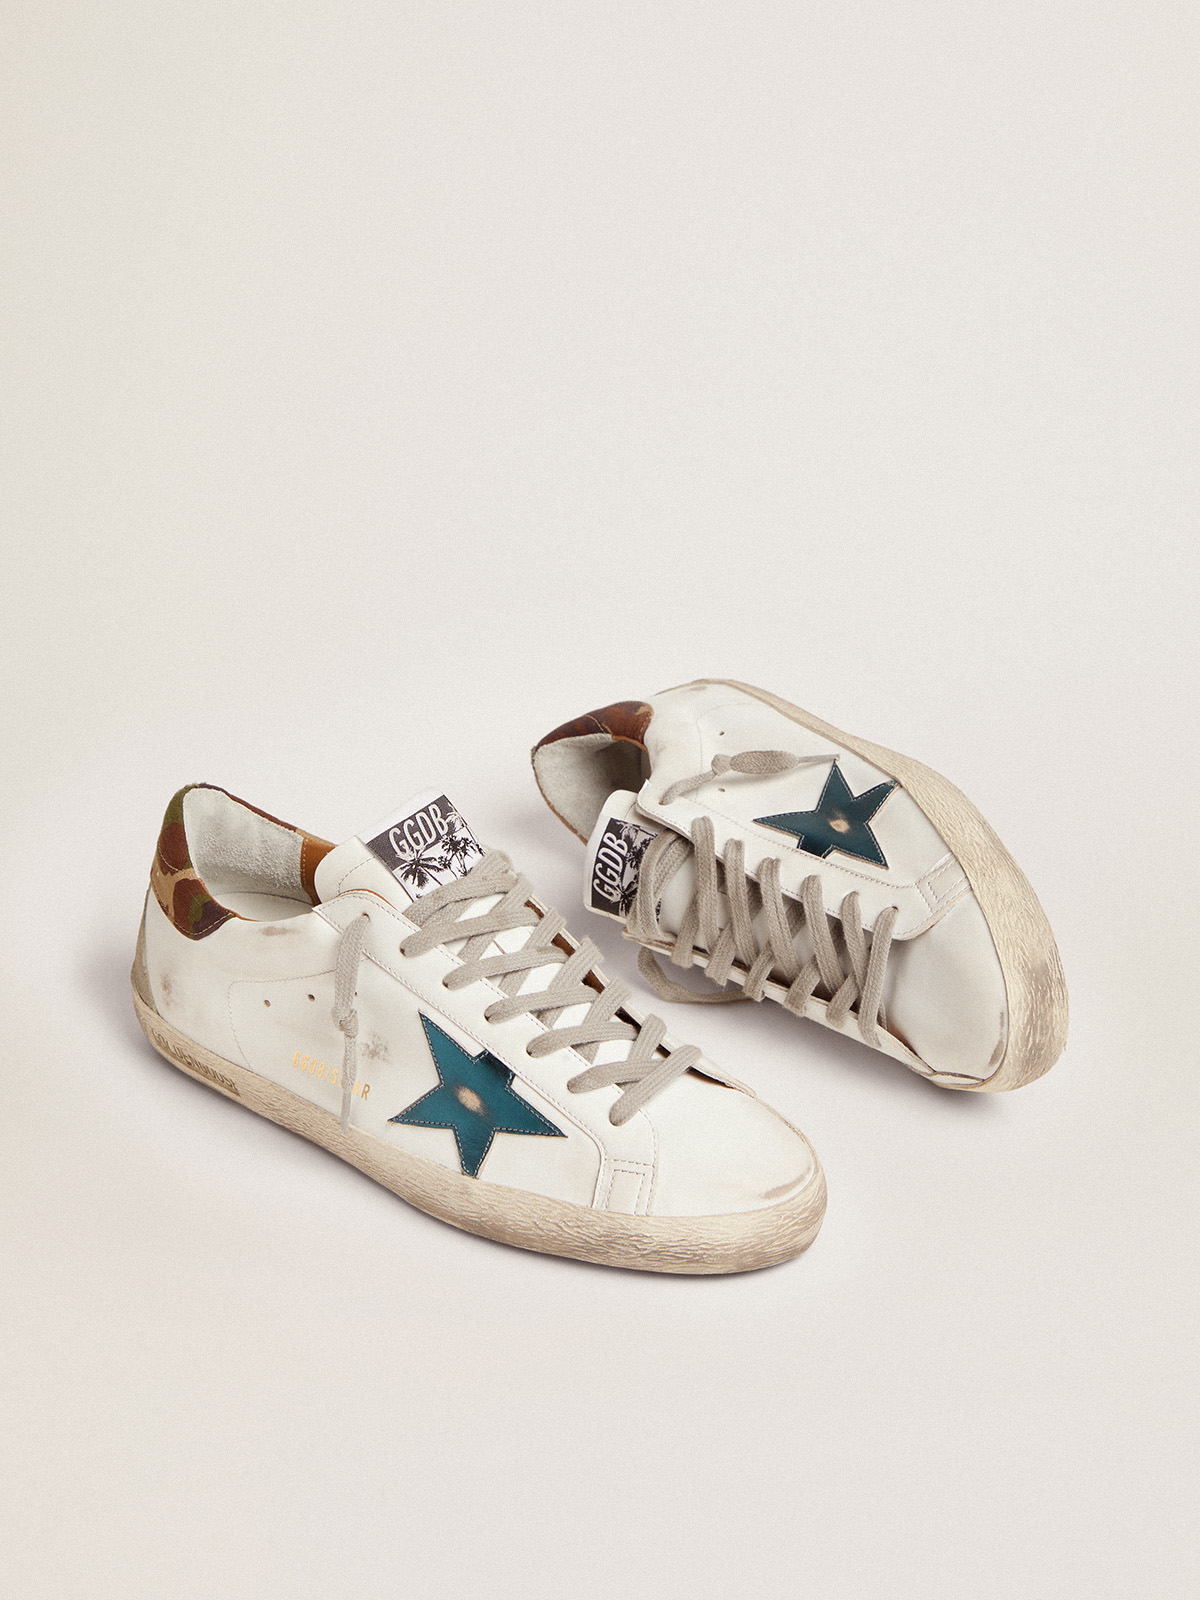 Super-Star sneakers with petrol-blue metallic leather star and 